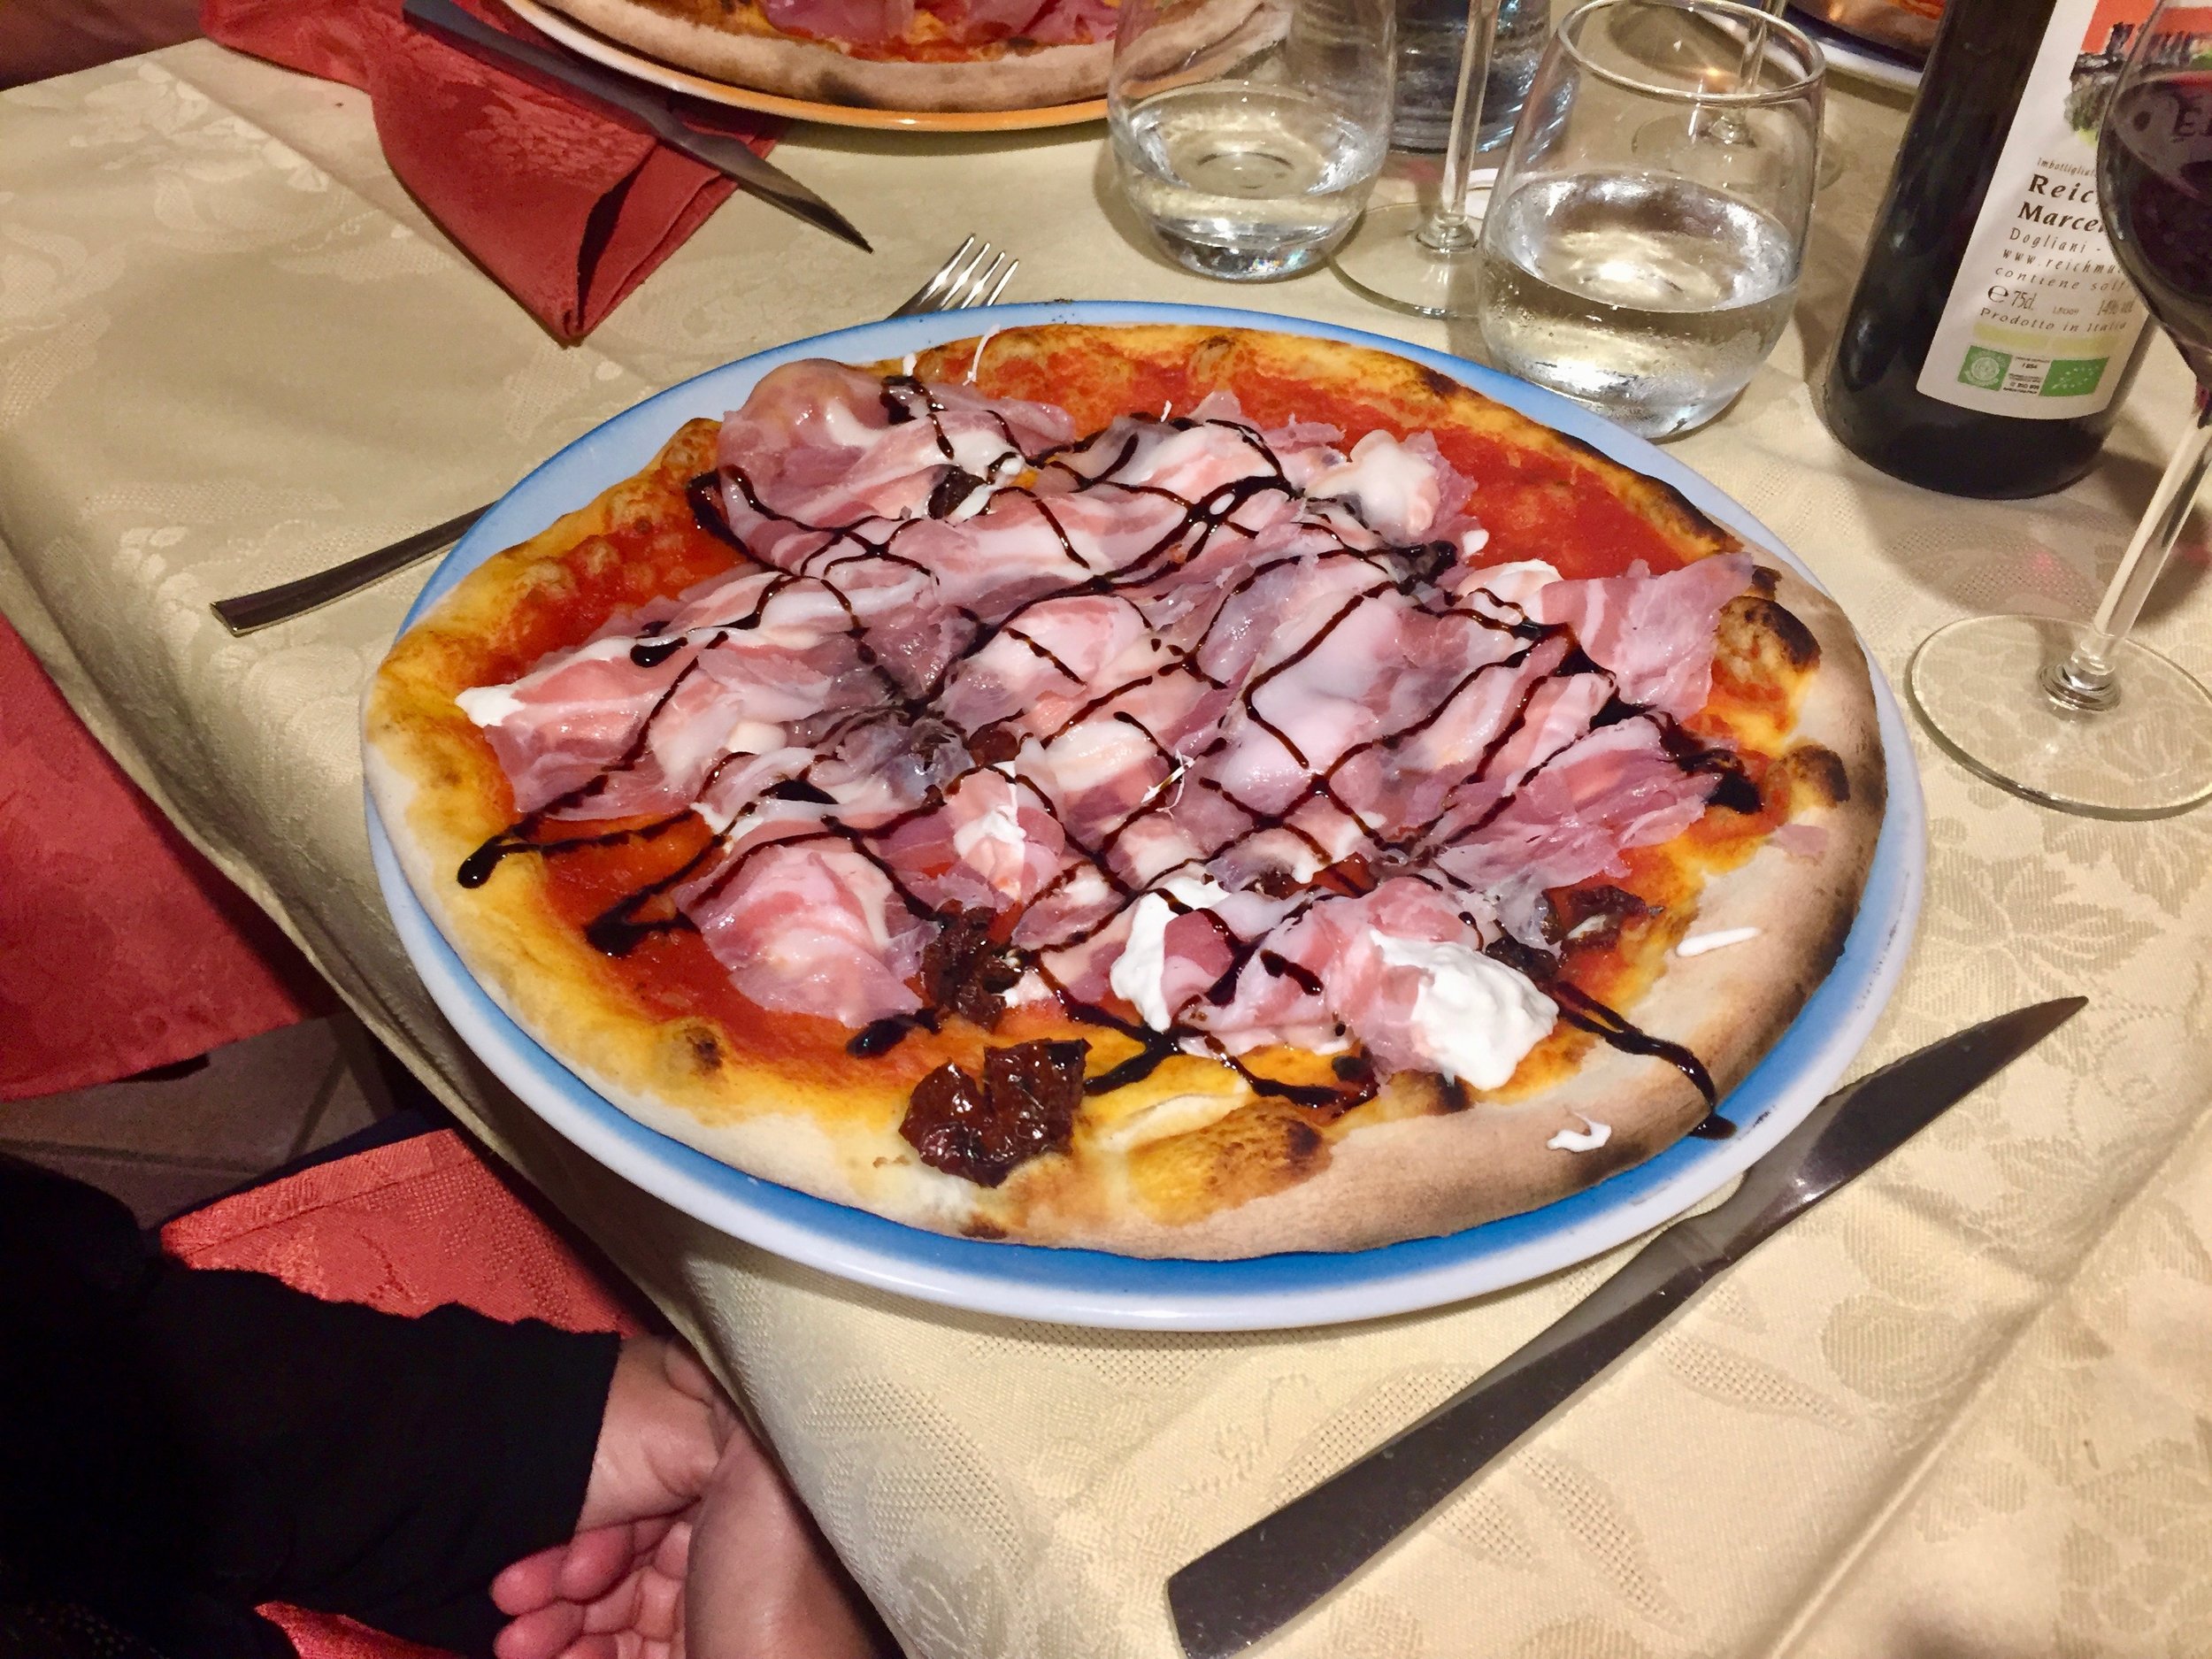 Some of the pizza at Cascina Manzo